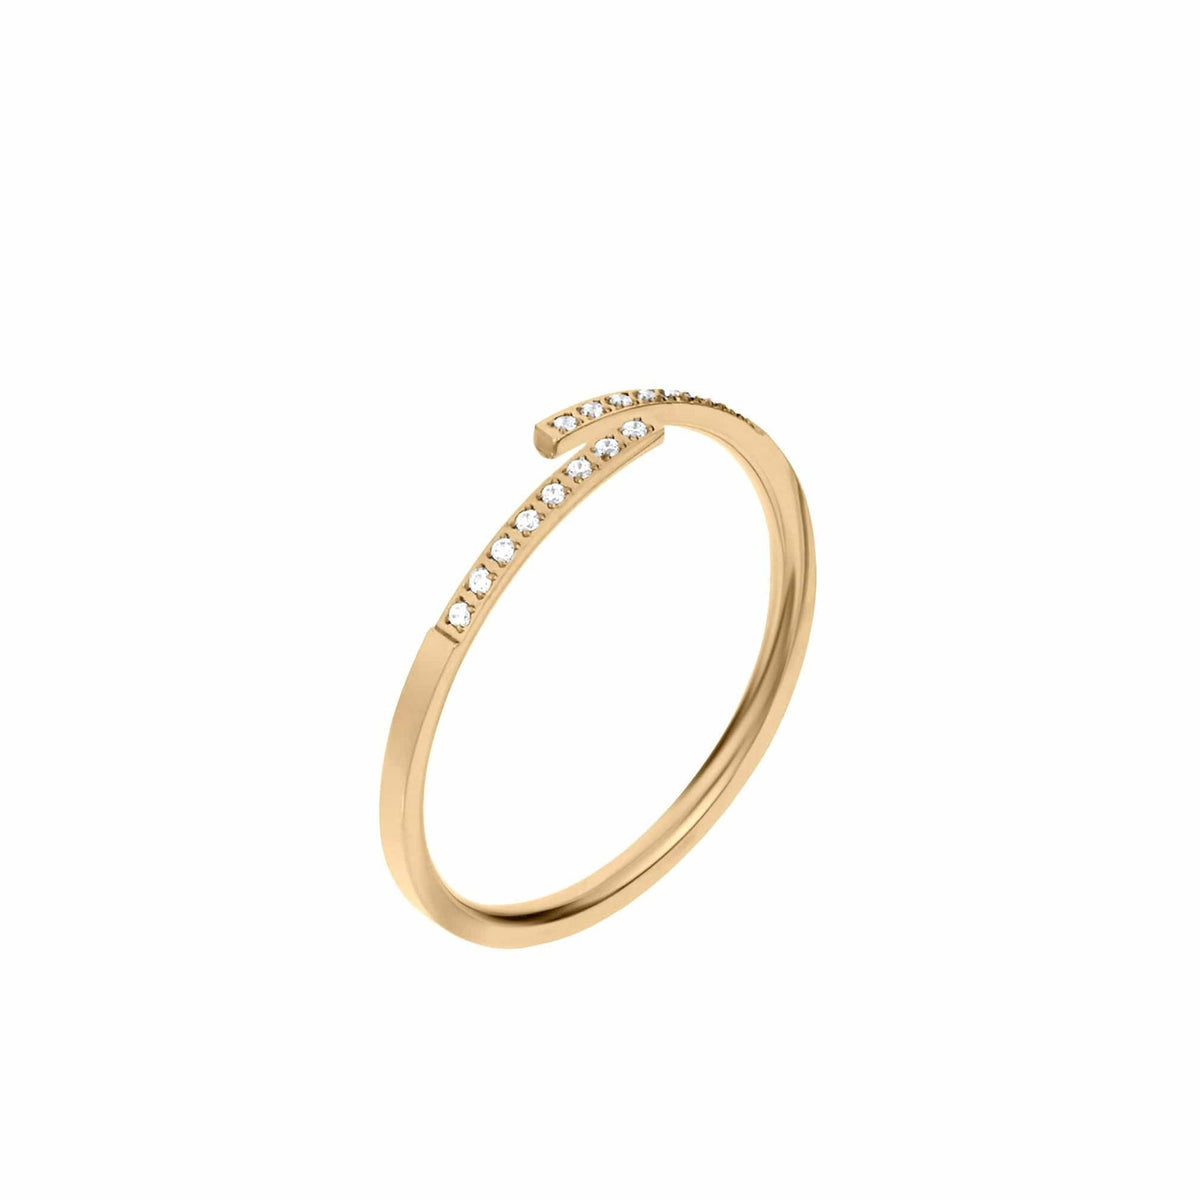 Patrice Dainty Ring